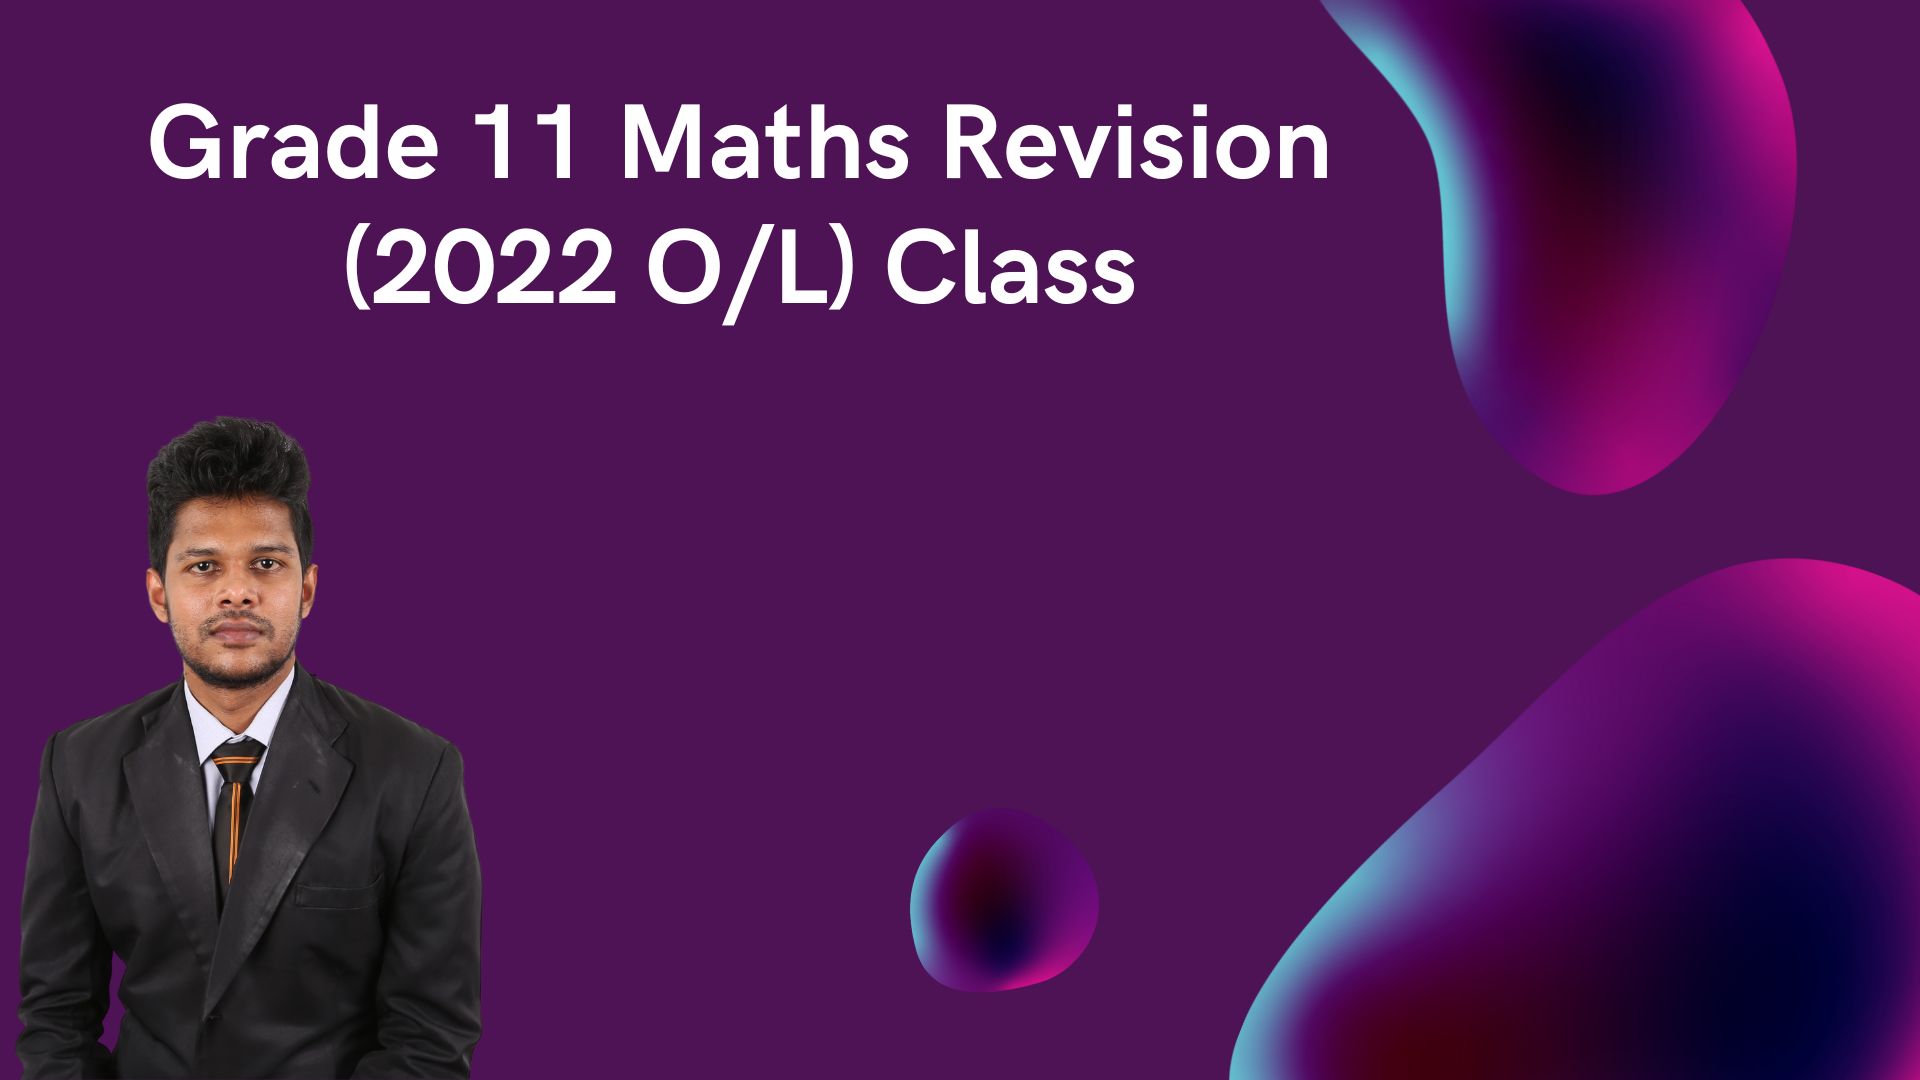 2022 O/L Maths Revision Video Course May 23